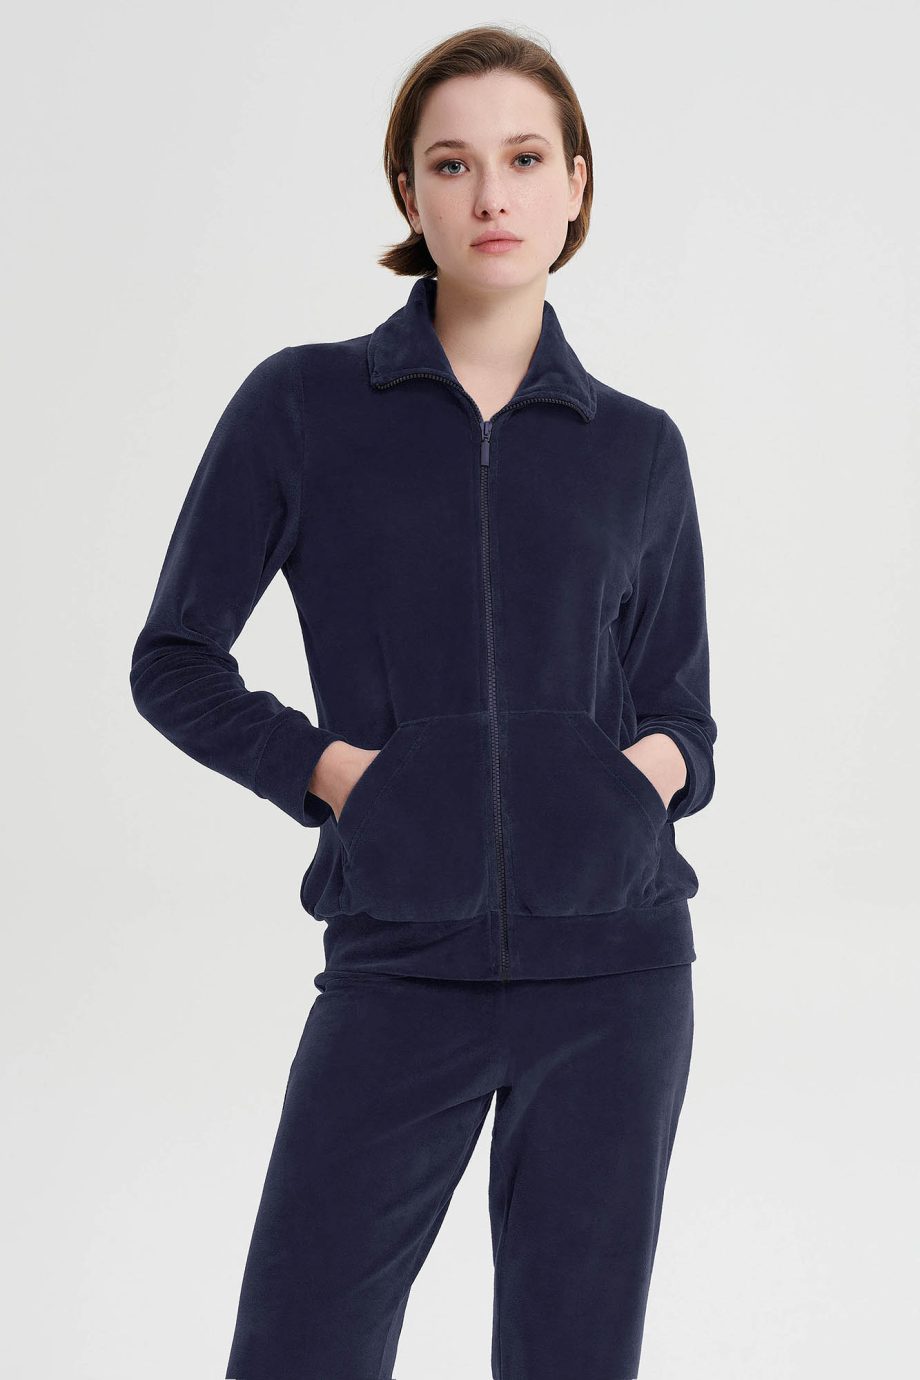 TRACKSUIT 80% COTTON – 20% POLYESTER